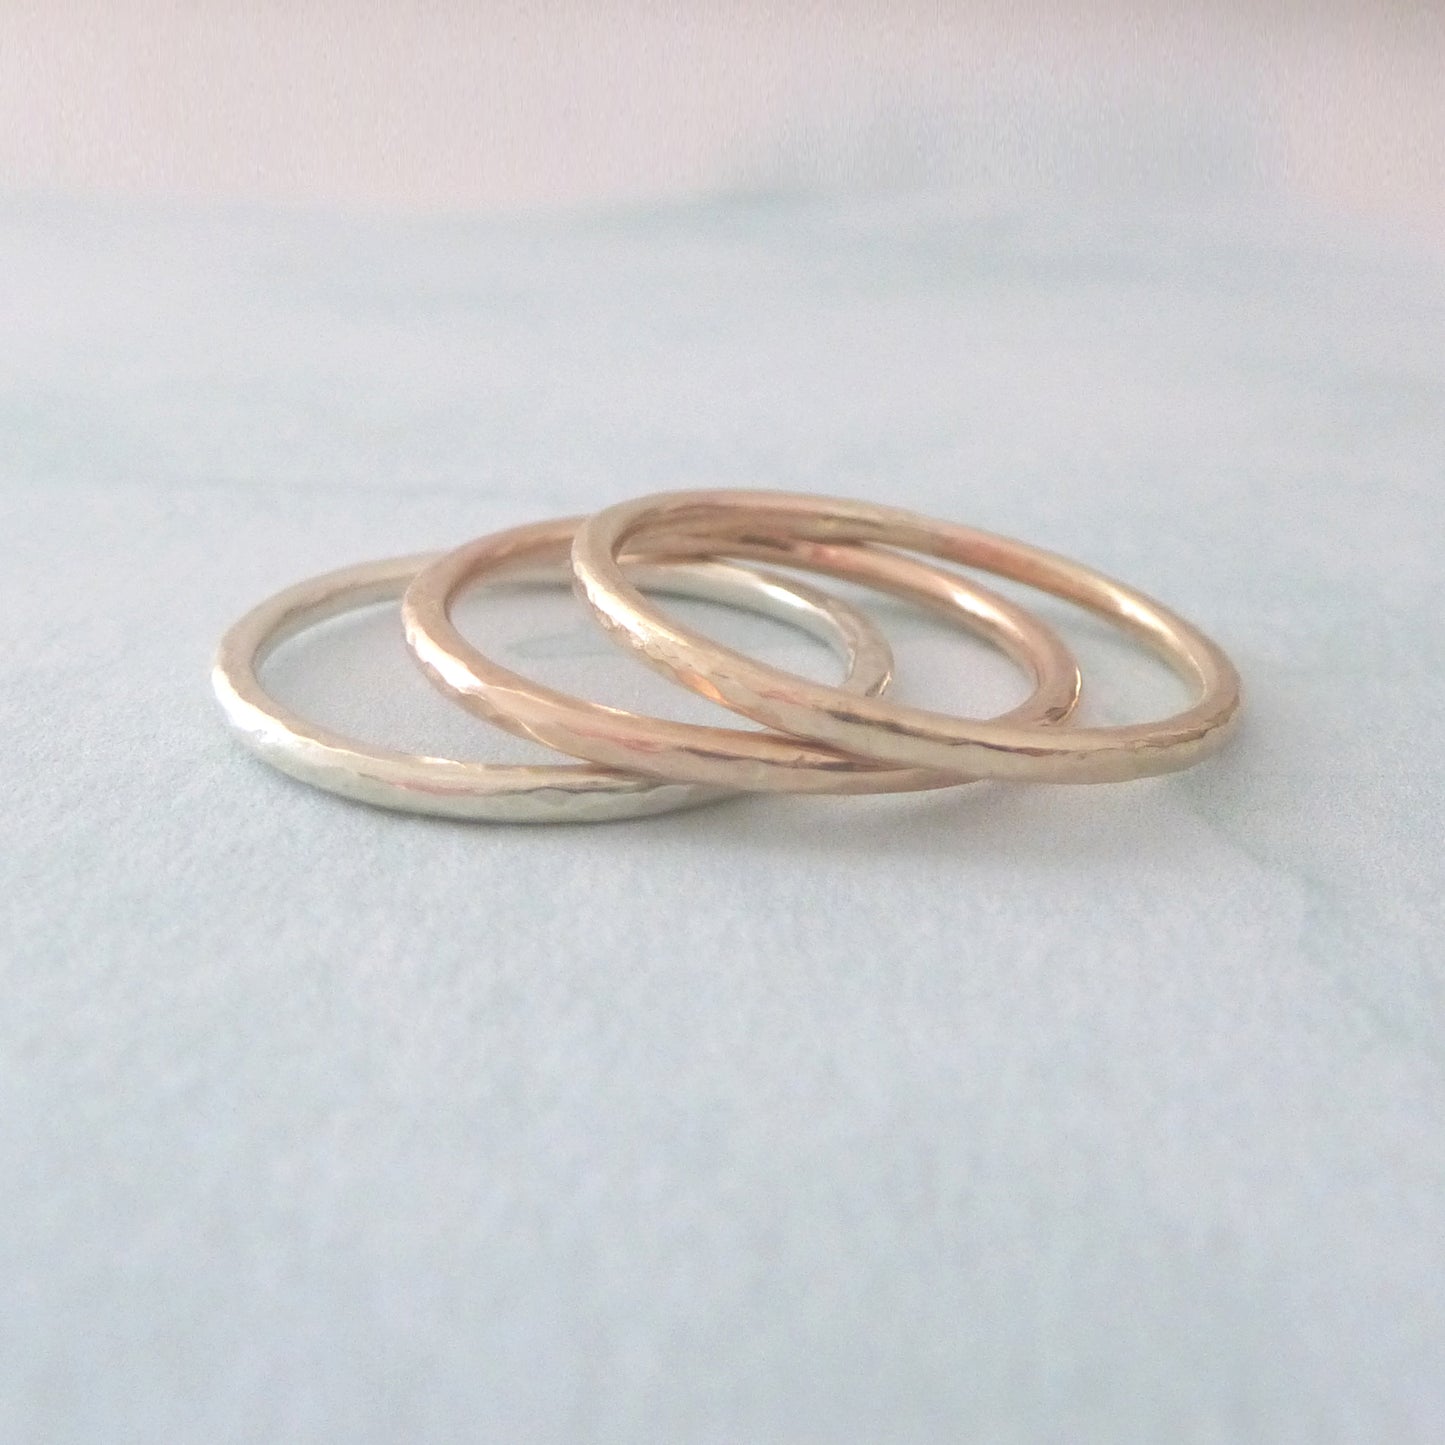 Elegant Band Ring in 9ct Gold - 1.2mm - yellow - Hammered or Smooth